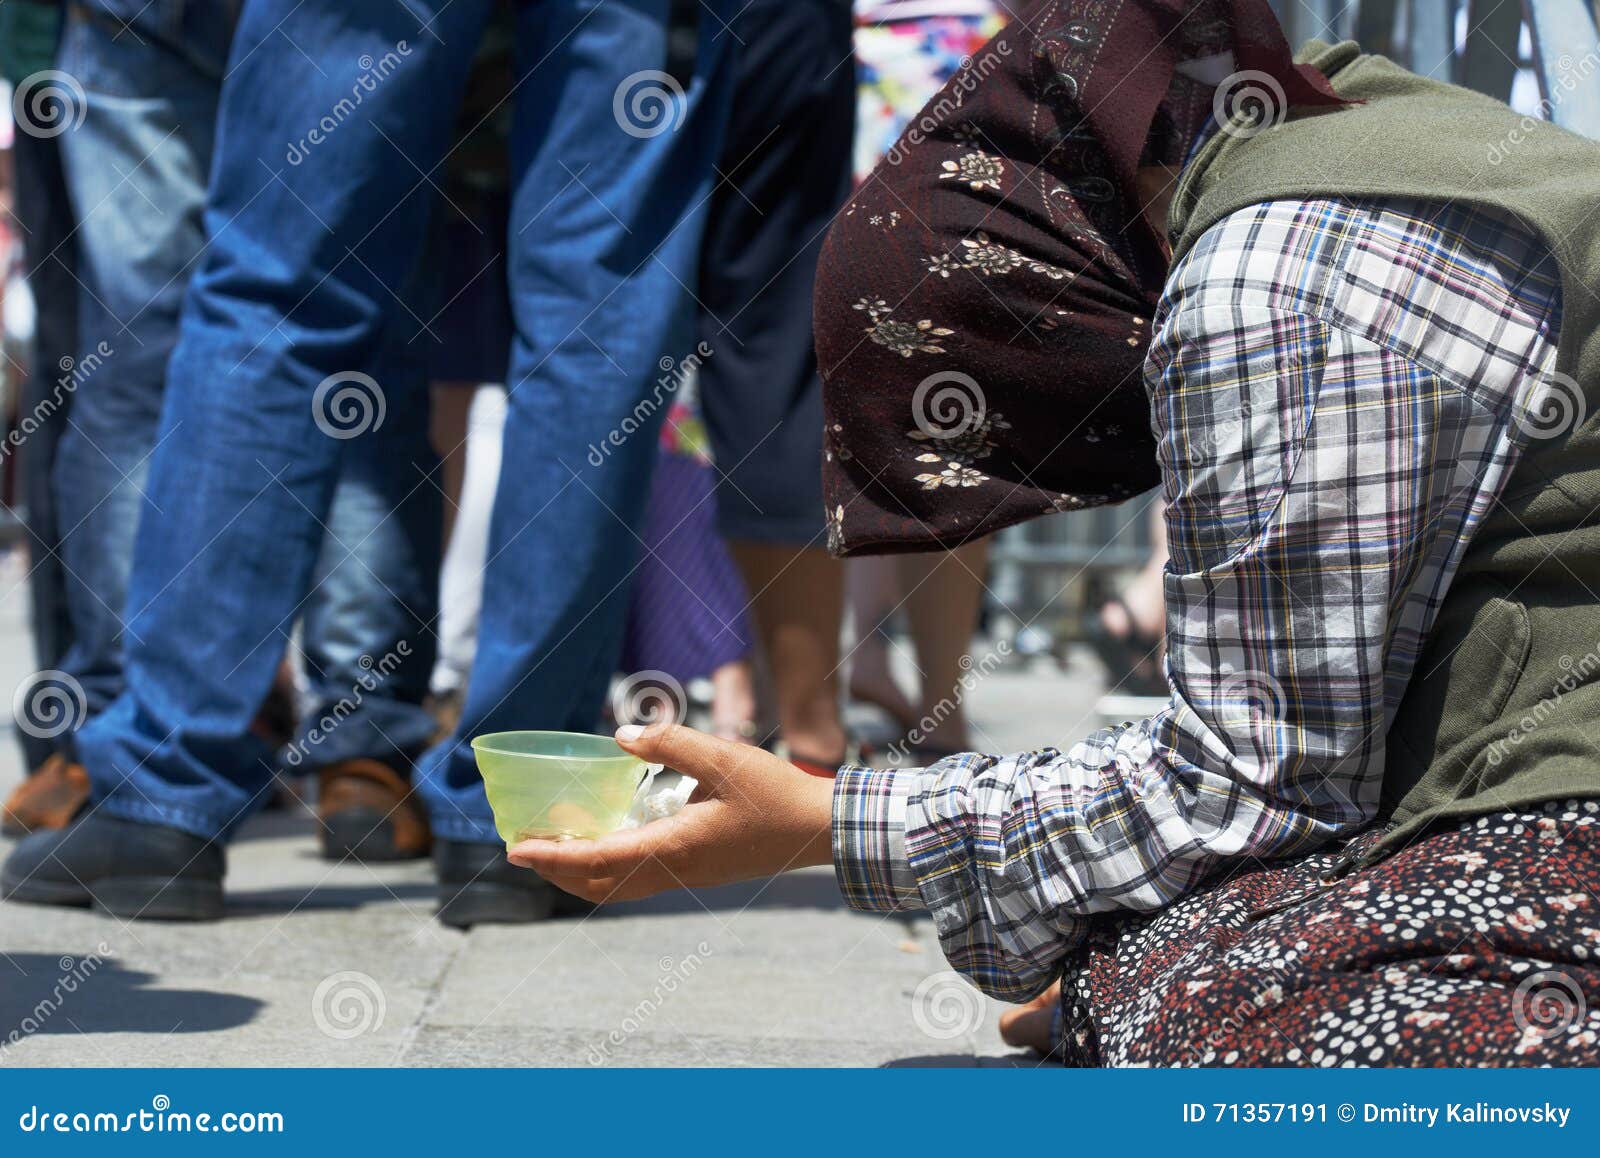 Beggar Woman Begging For Money In The Street Editorial Photo Image Of Help Pauper 71357191 